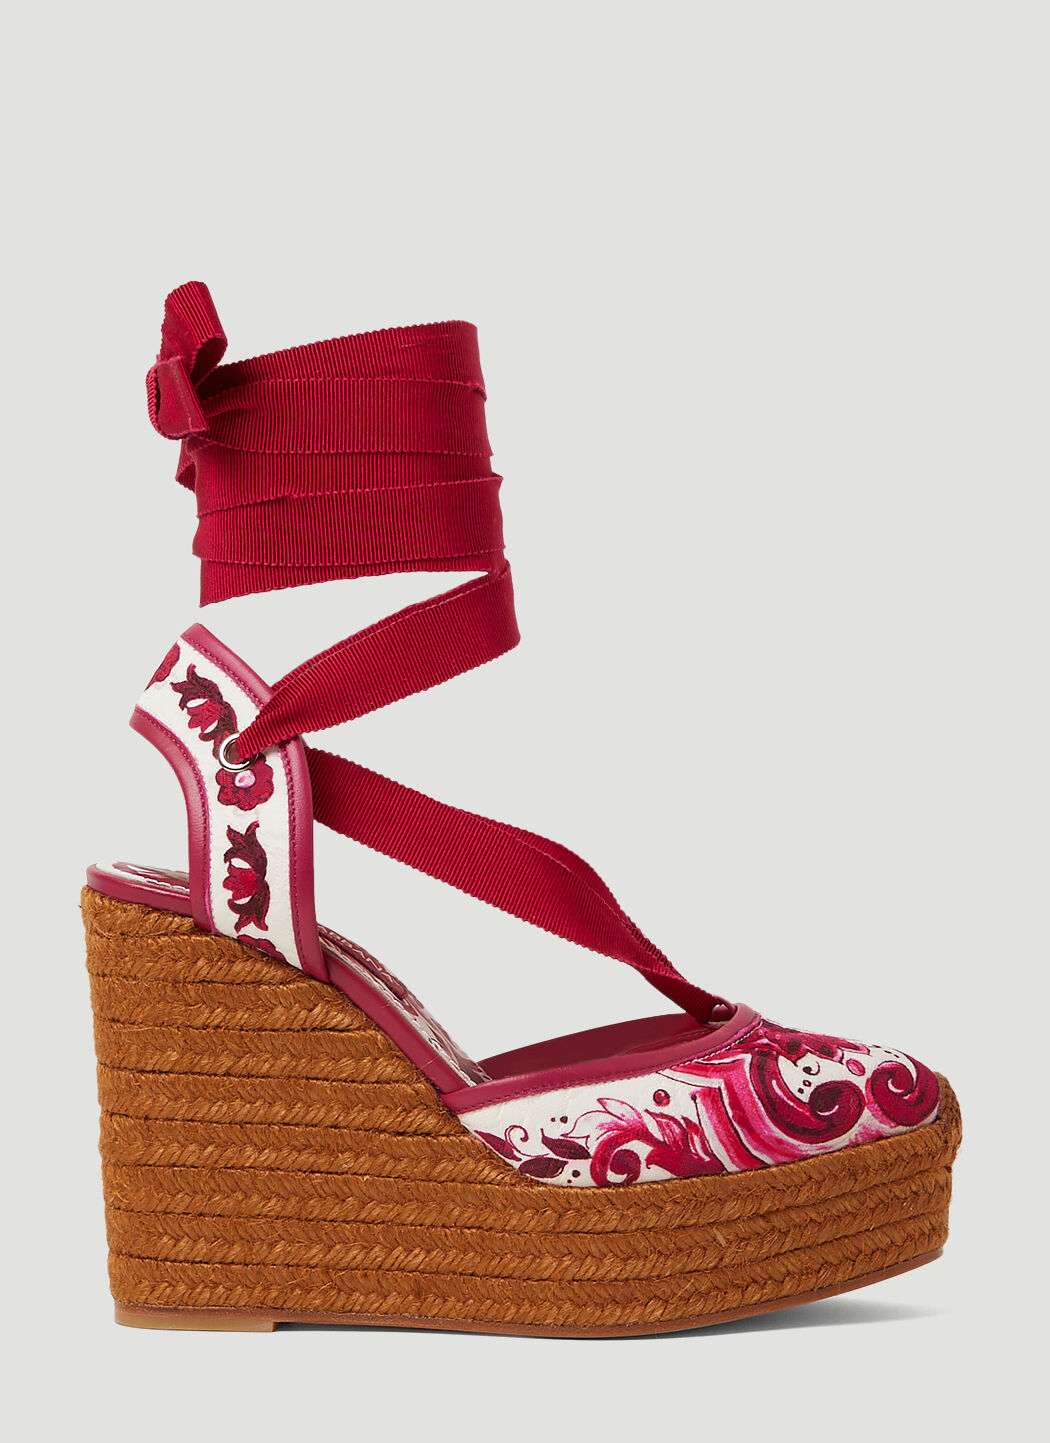 Gianvito Rossi Printed Brocade Wedge Sandals Brown gia0255001